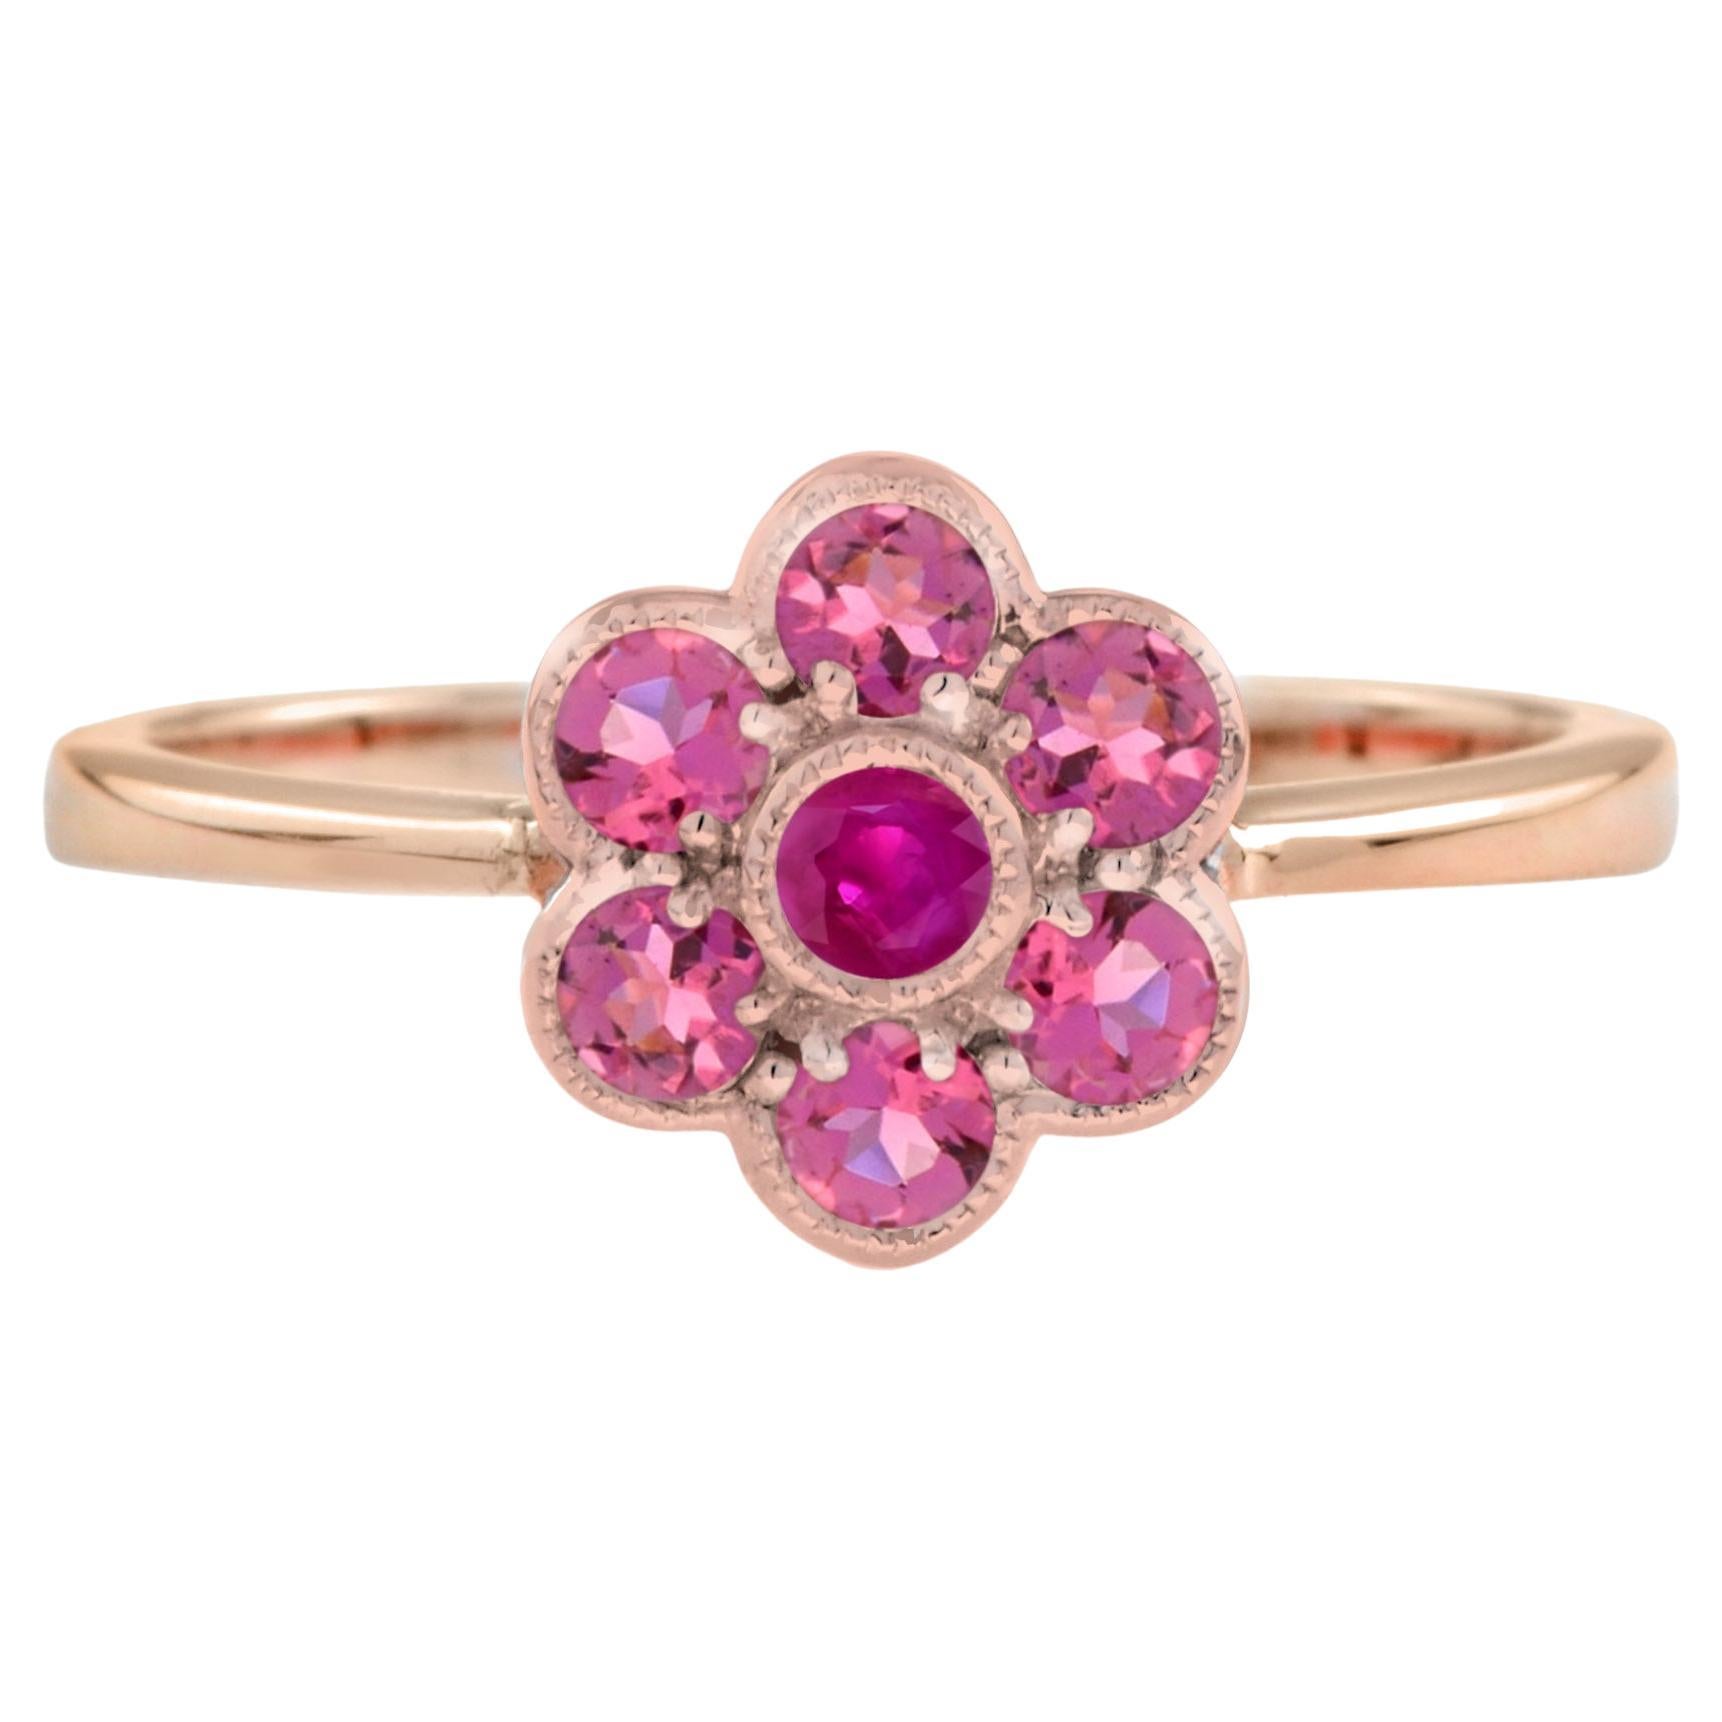 For Sale:  Ruby and Pink Tourmaline Floral Cluster Ring in 14K Rose Gold